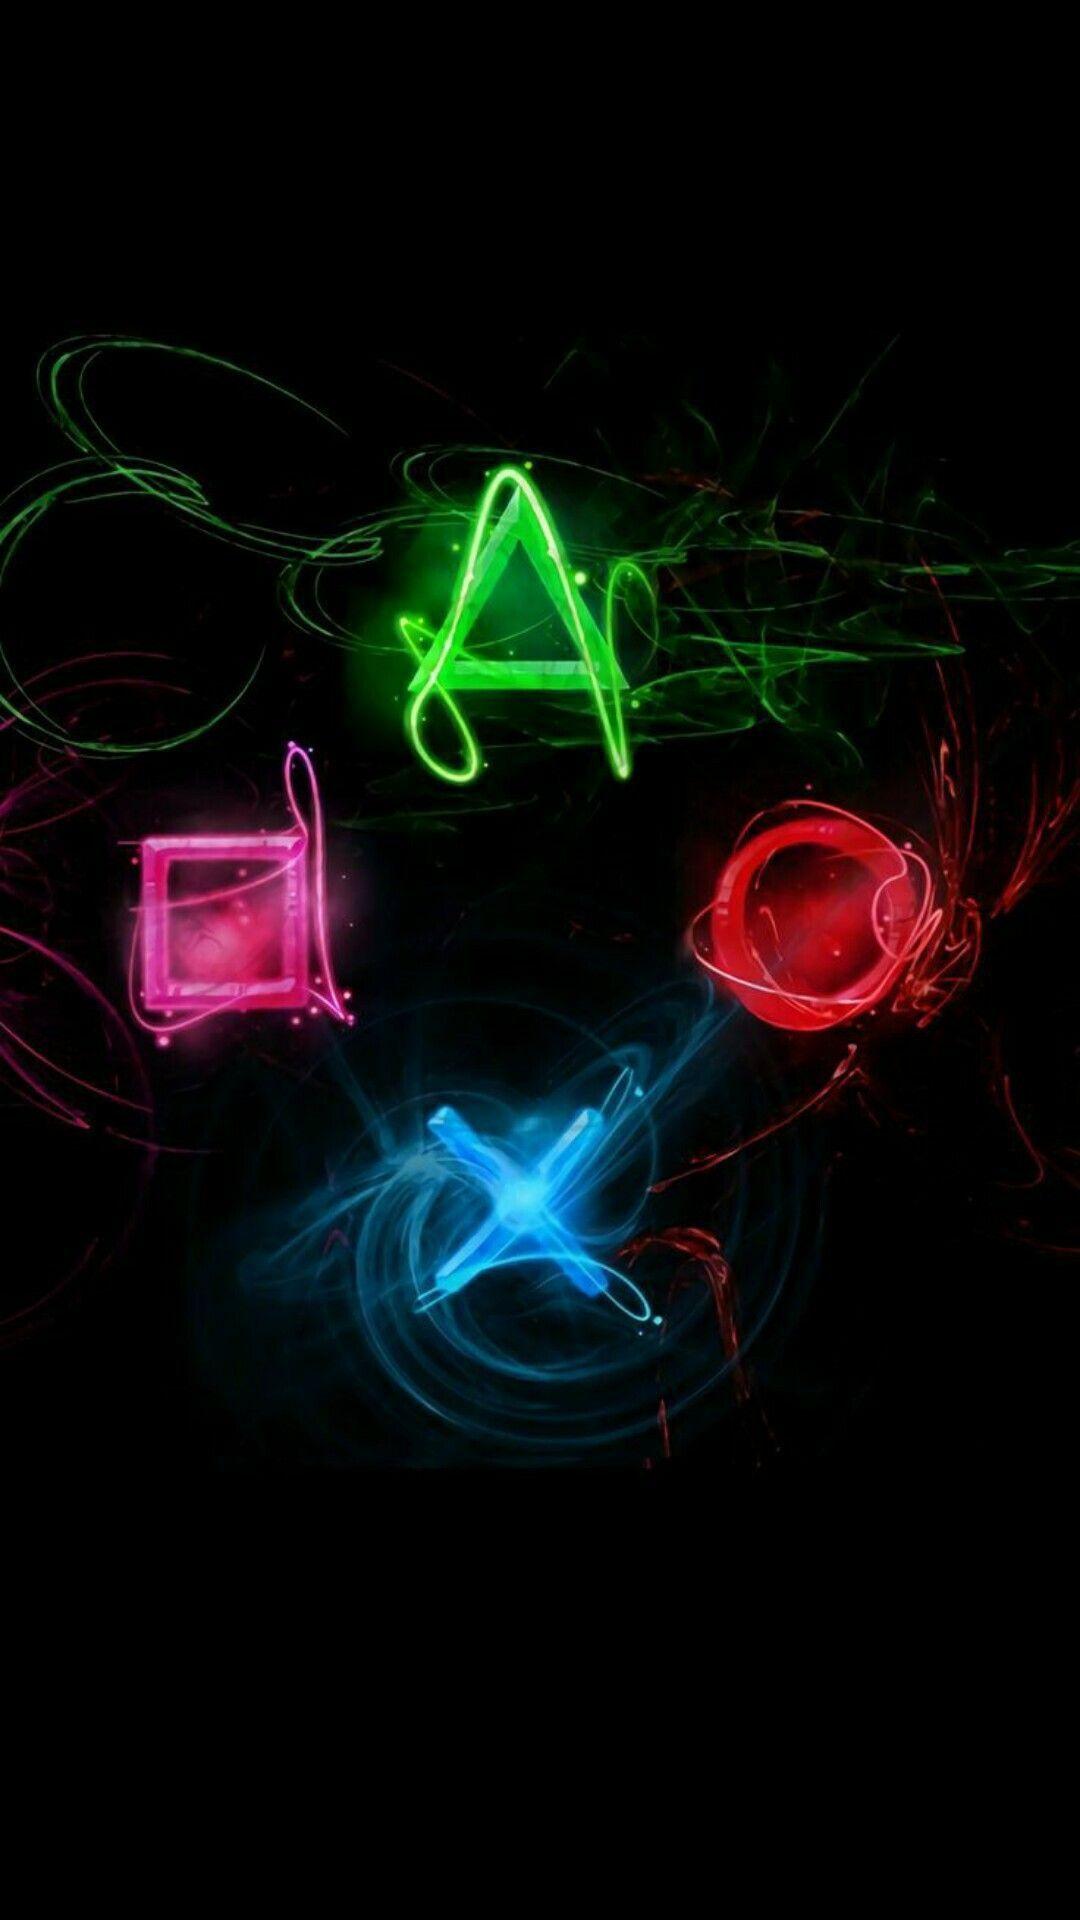 Playstation Iphone Wallpapers Top Free Playstation Iphone Backgrounds Wallpaperaccess